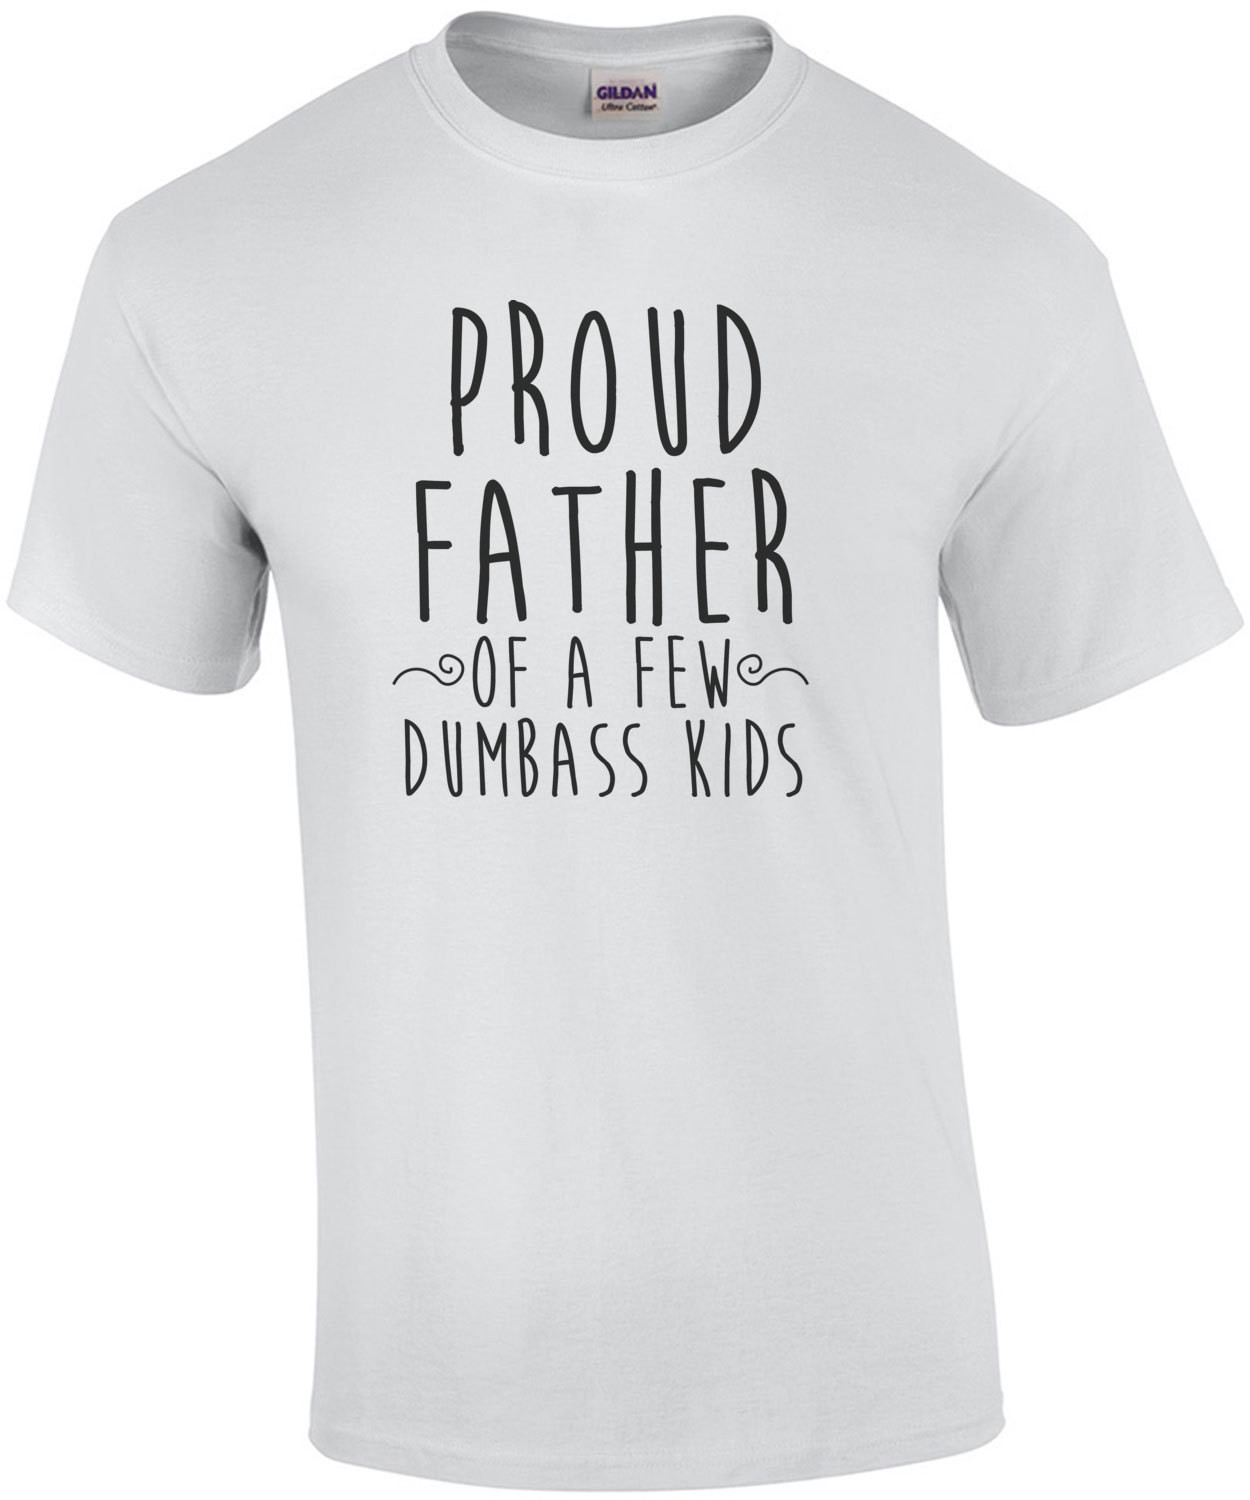 Proud Father of a few dumbass kids - funny father t-shirt